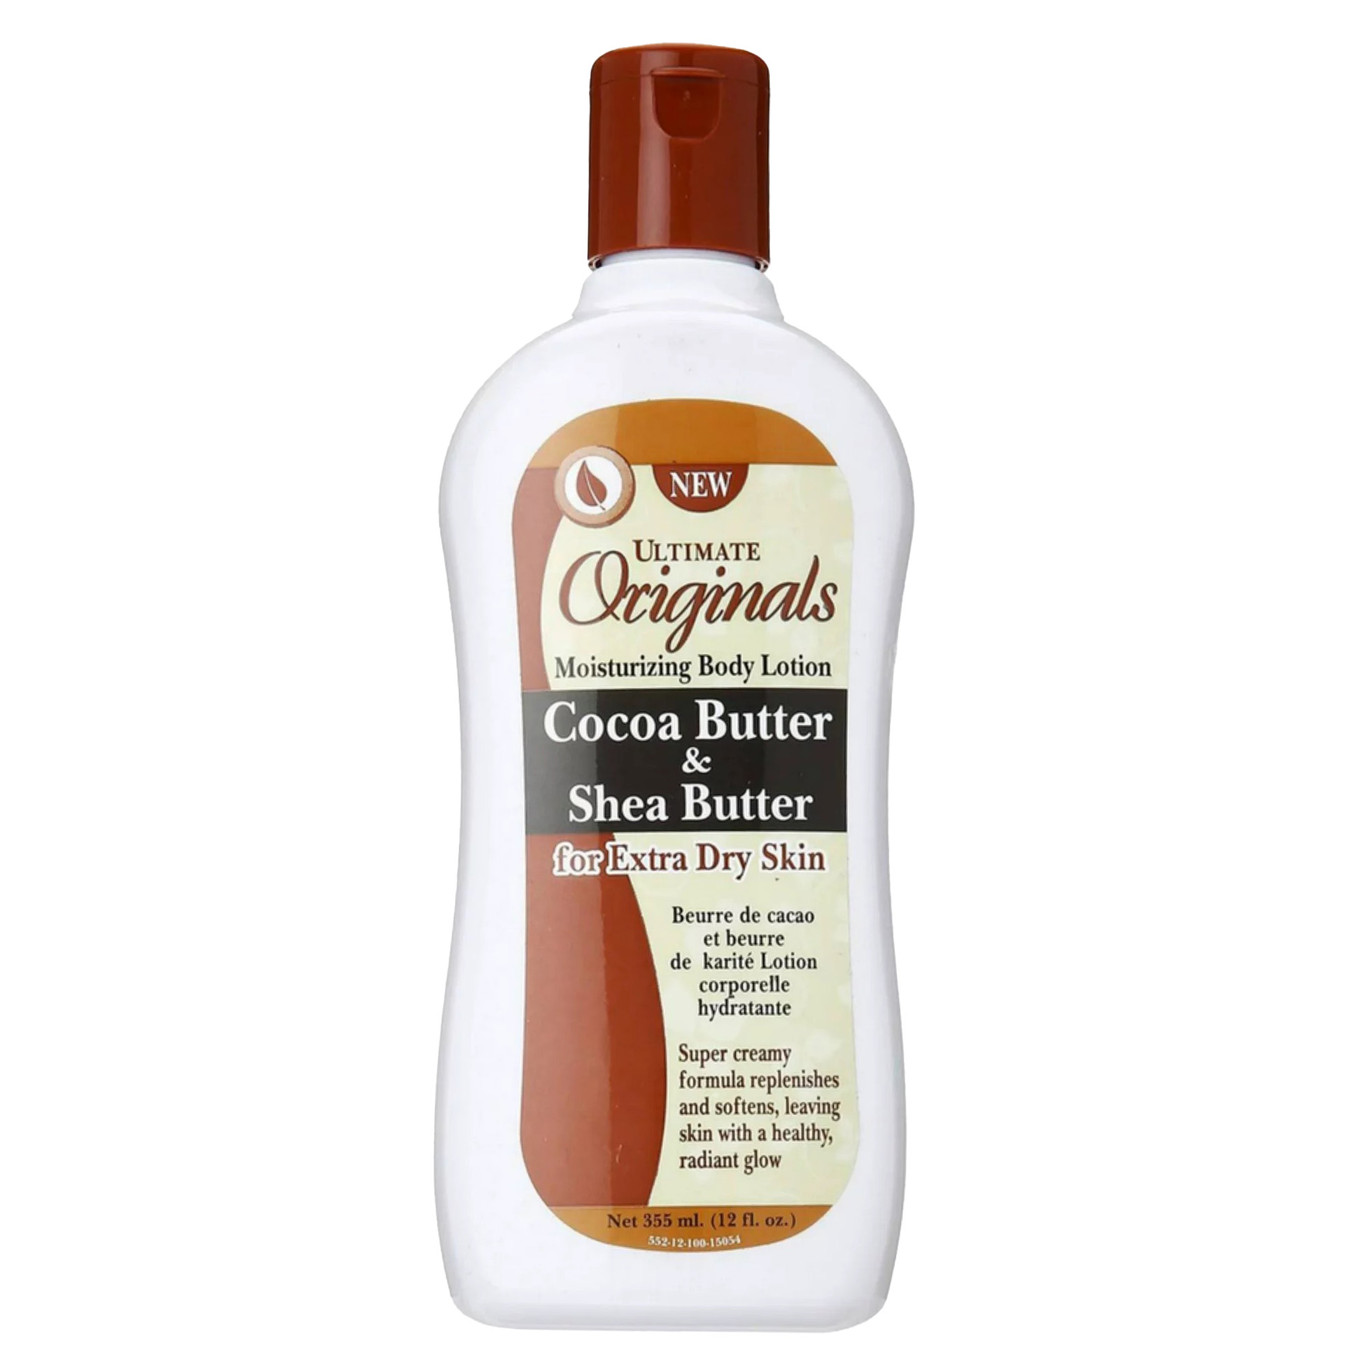 Africas Best Ultimate Originals Cocoa Butter & Shea Butter Moisturizing Body Lotion (12 oz)